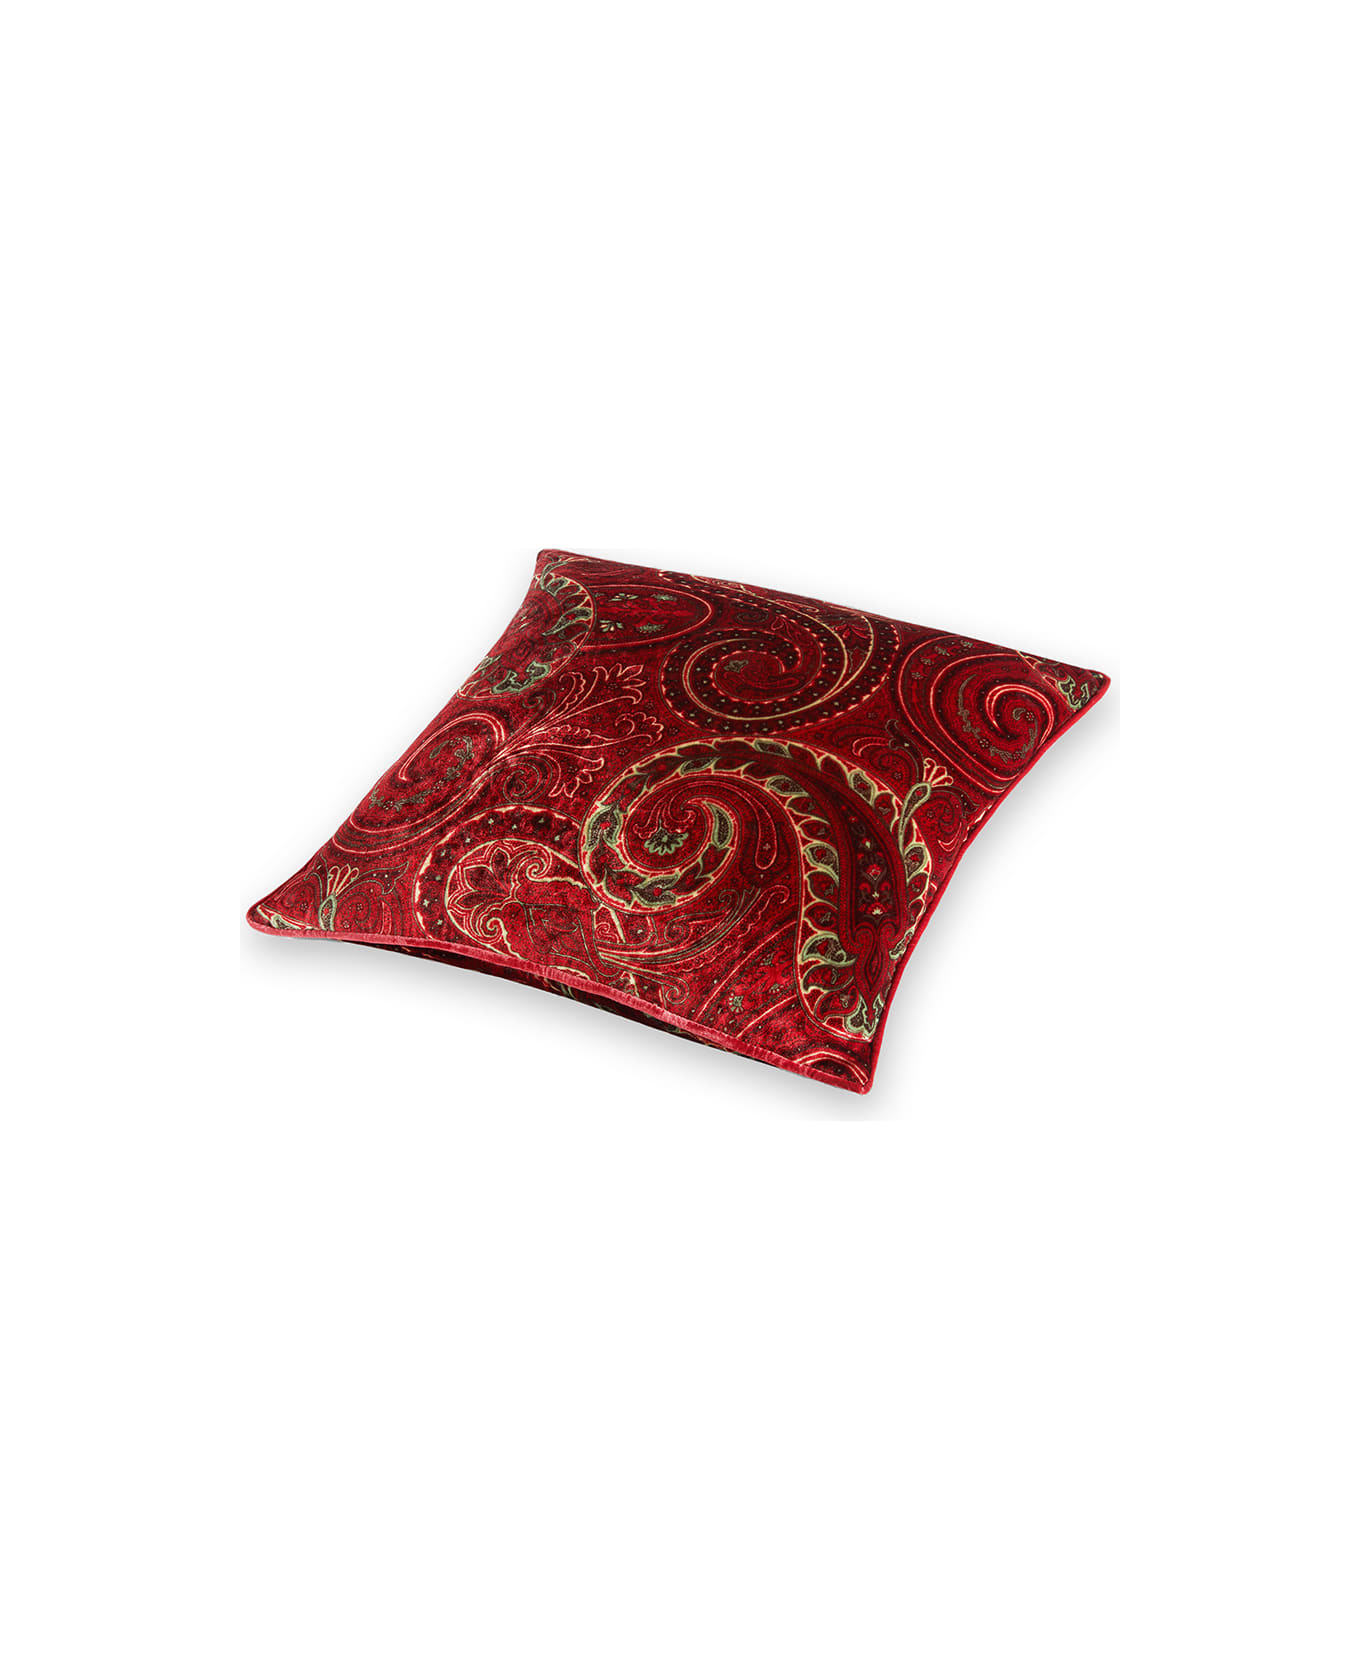 Etro Red Cushion With All-over Paisley Print In Velvet Home - Red